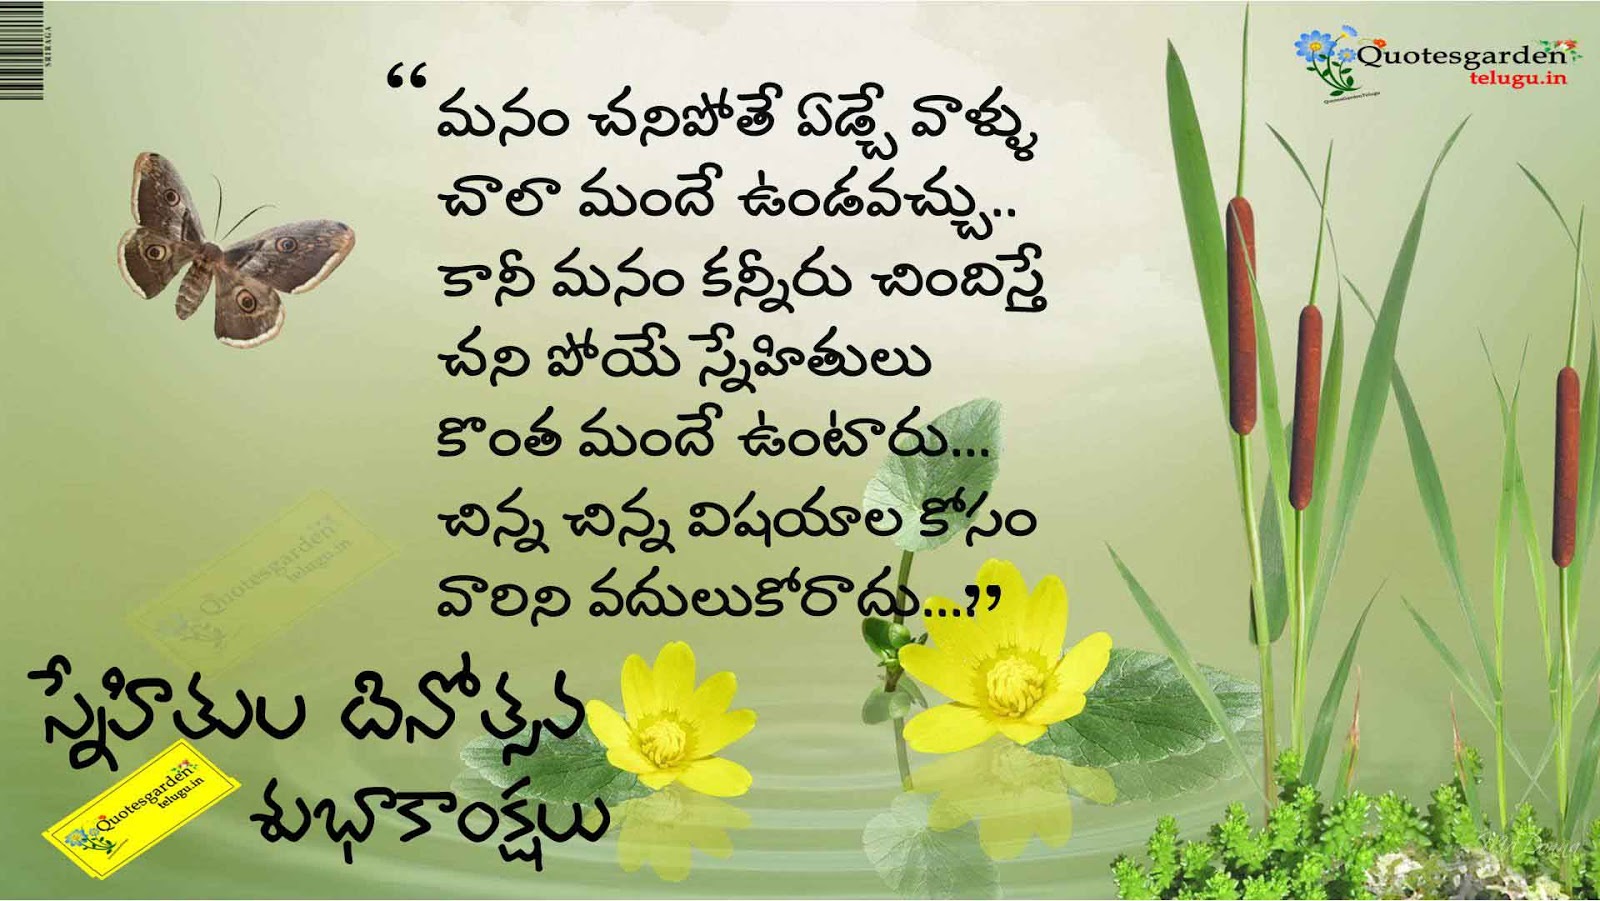 best friendship day quotes greetings messages wallpapers in telugu ...